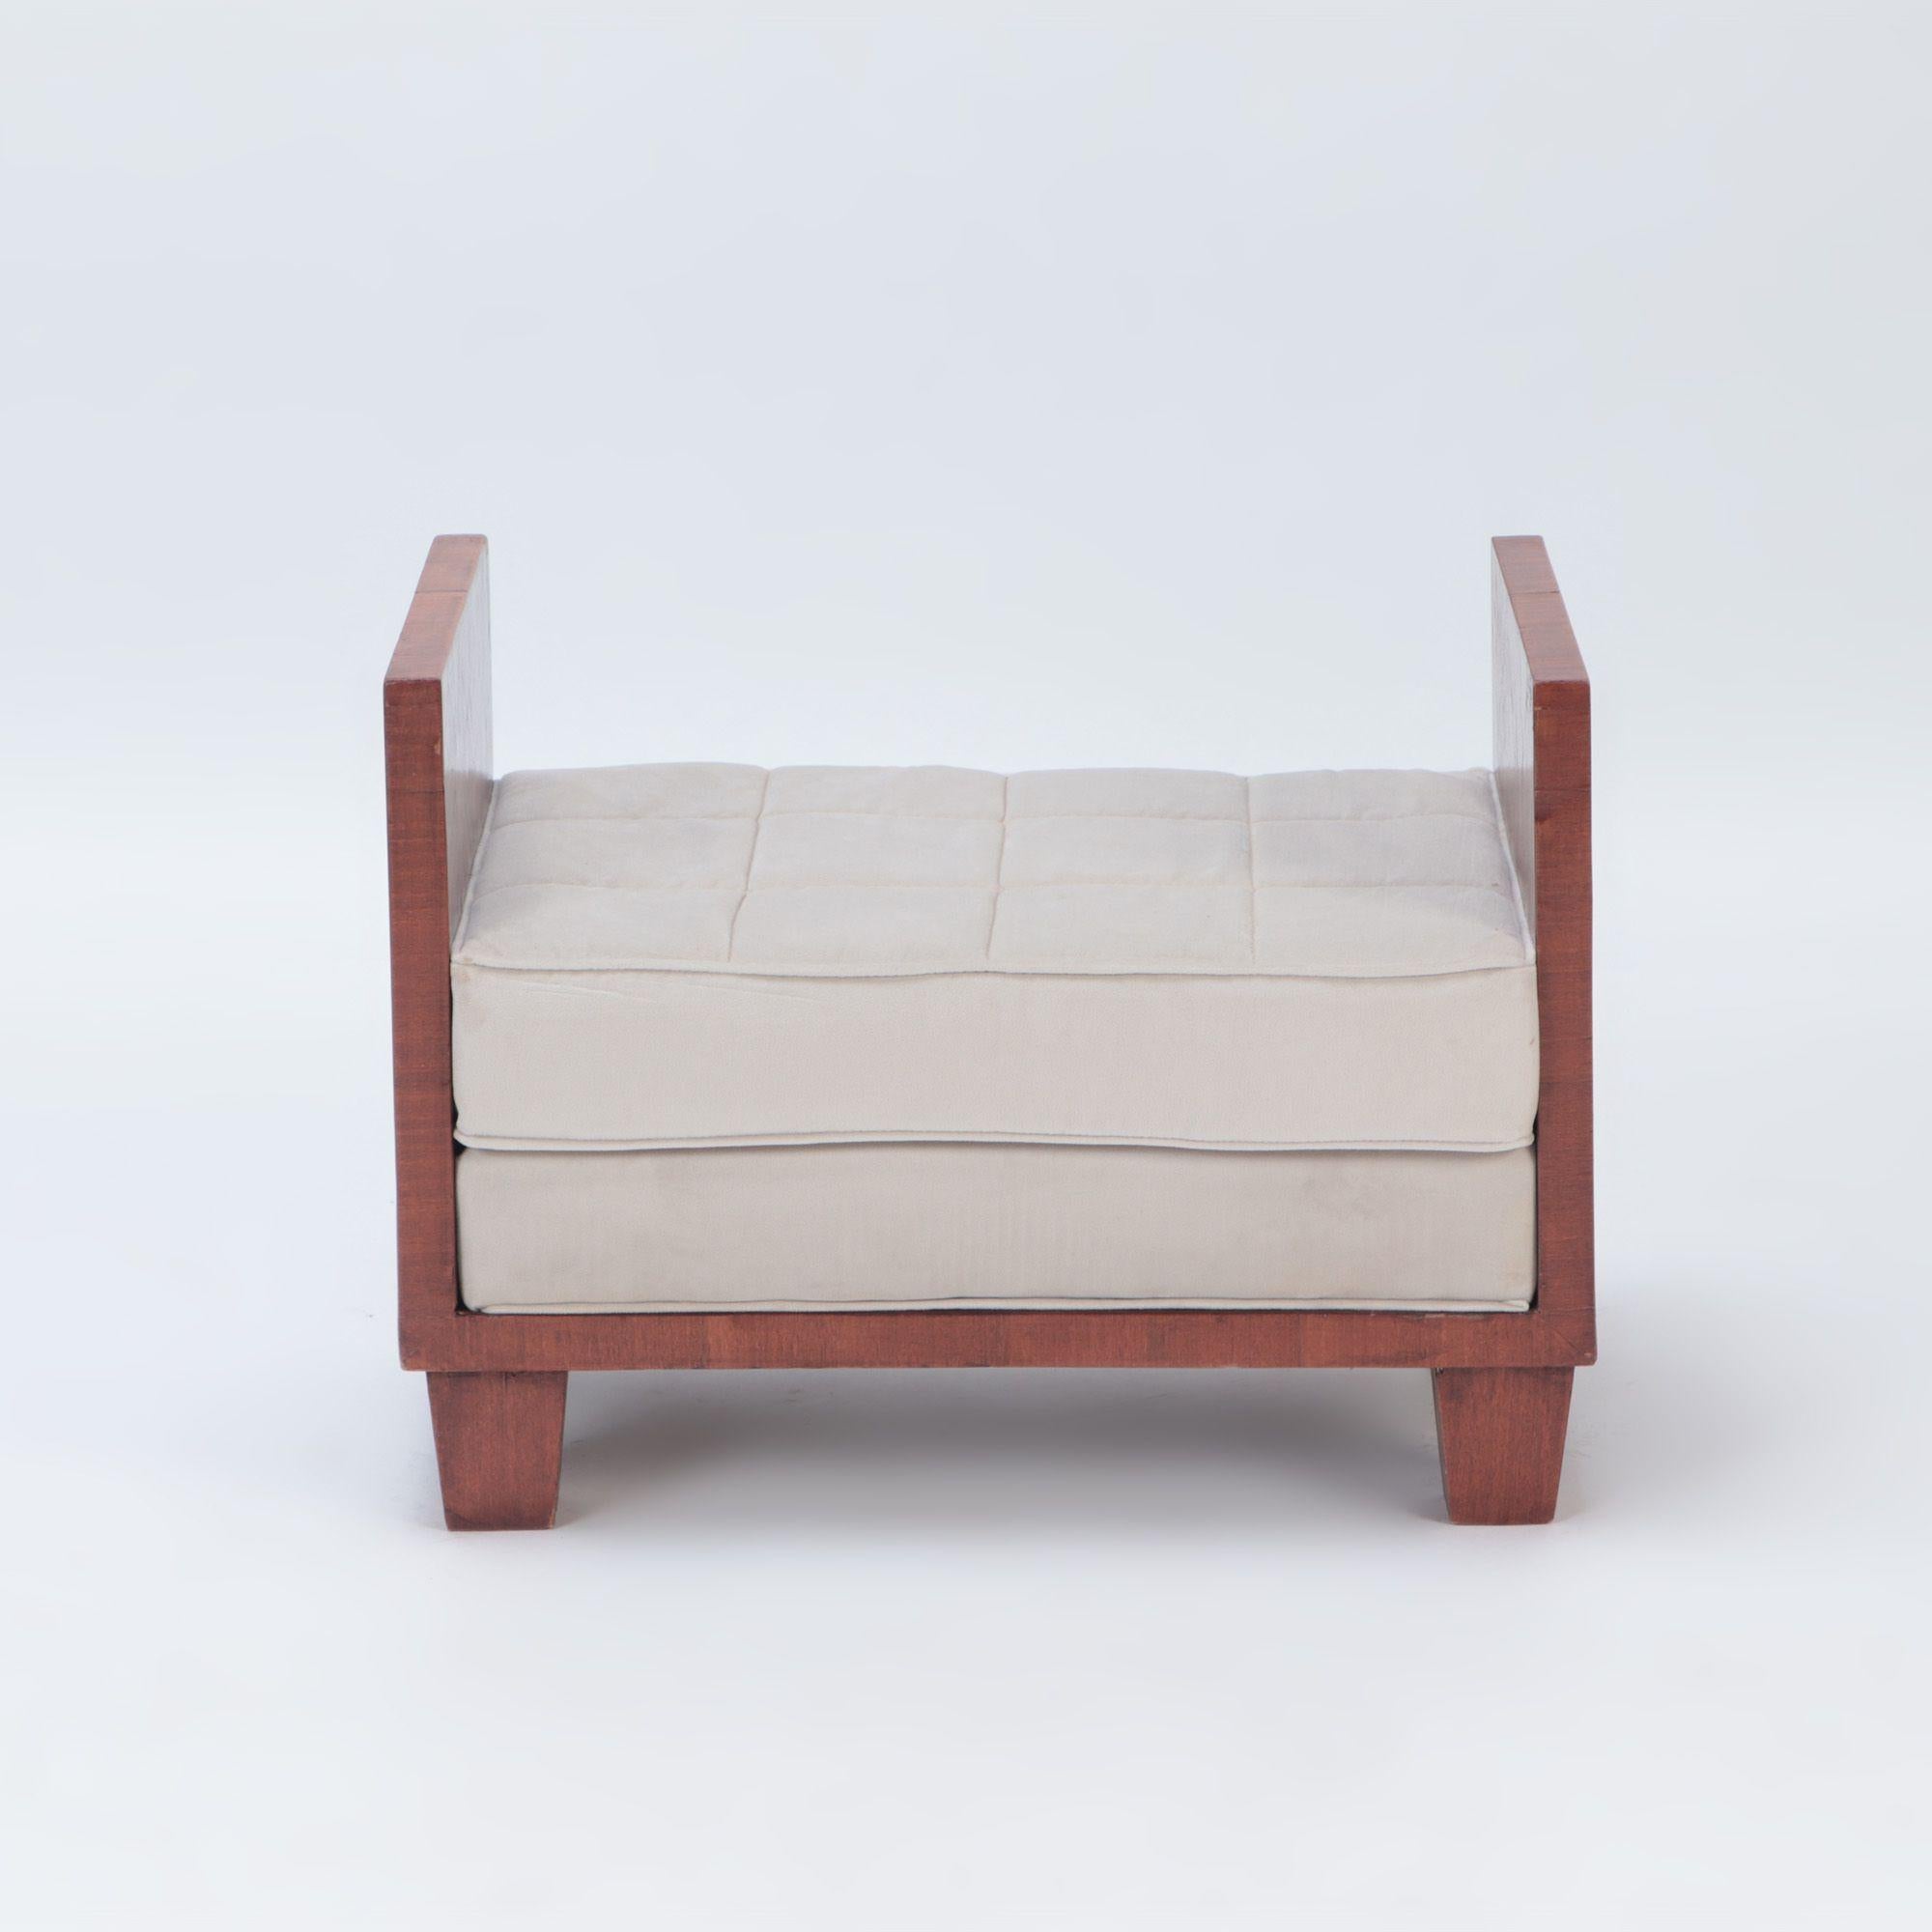 A wooden upholstered bench, in the manner of Jean-Michel Frank, contemporary.